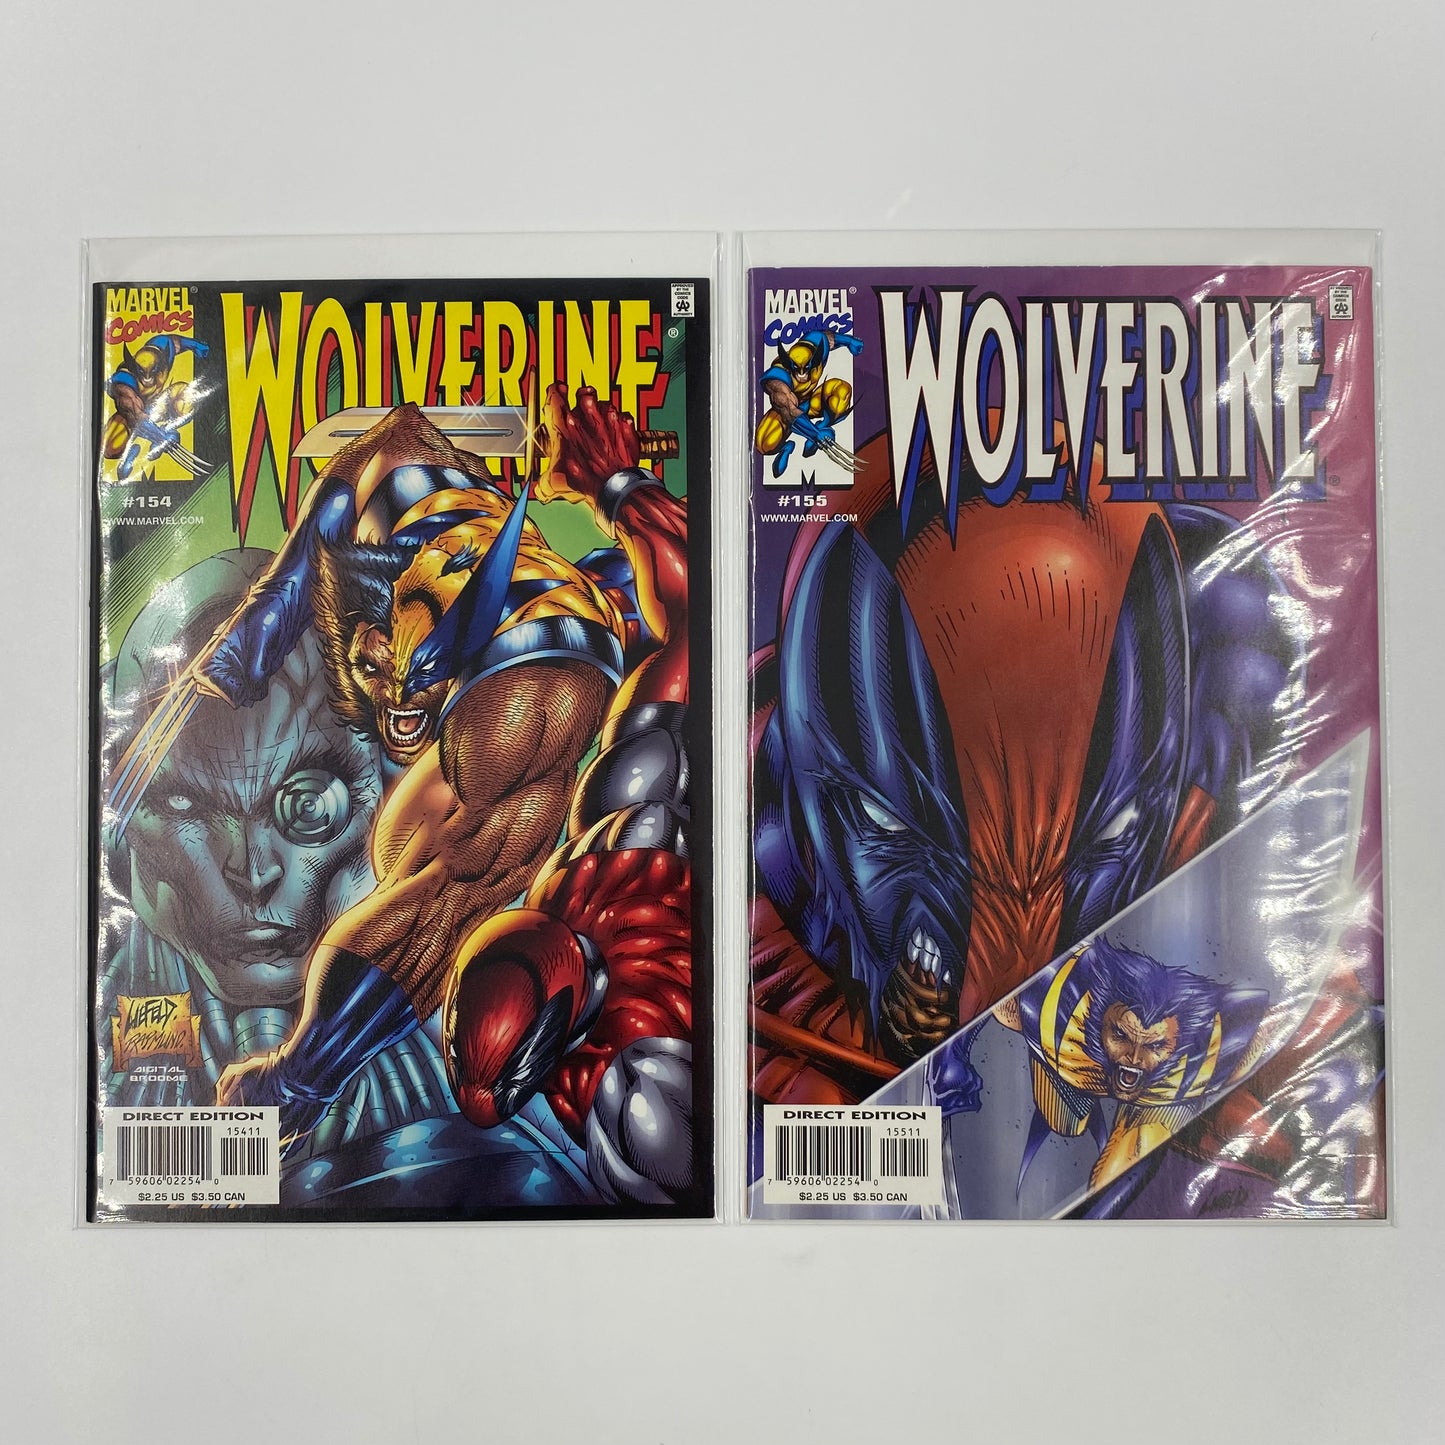 Wolverine #154-155 “All Along the Watchtower” (2000) Marvel